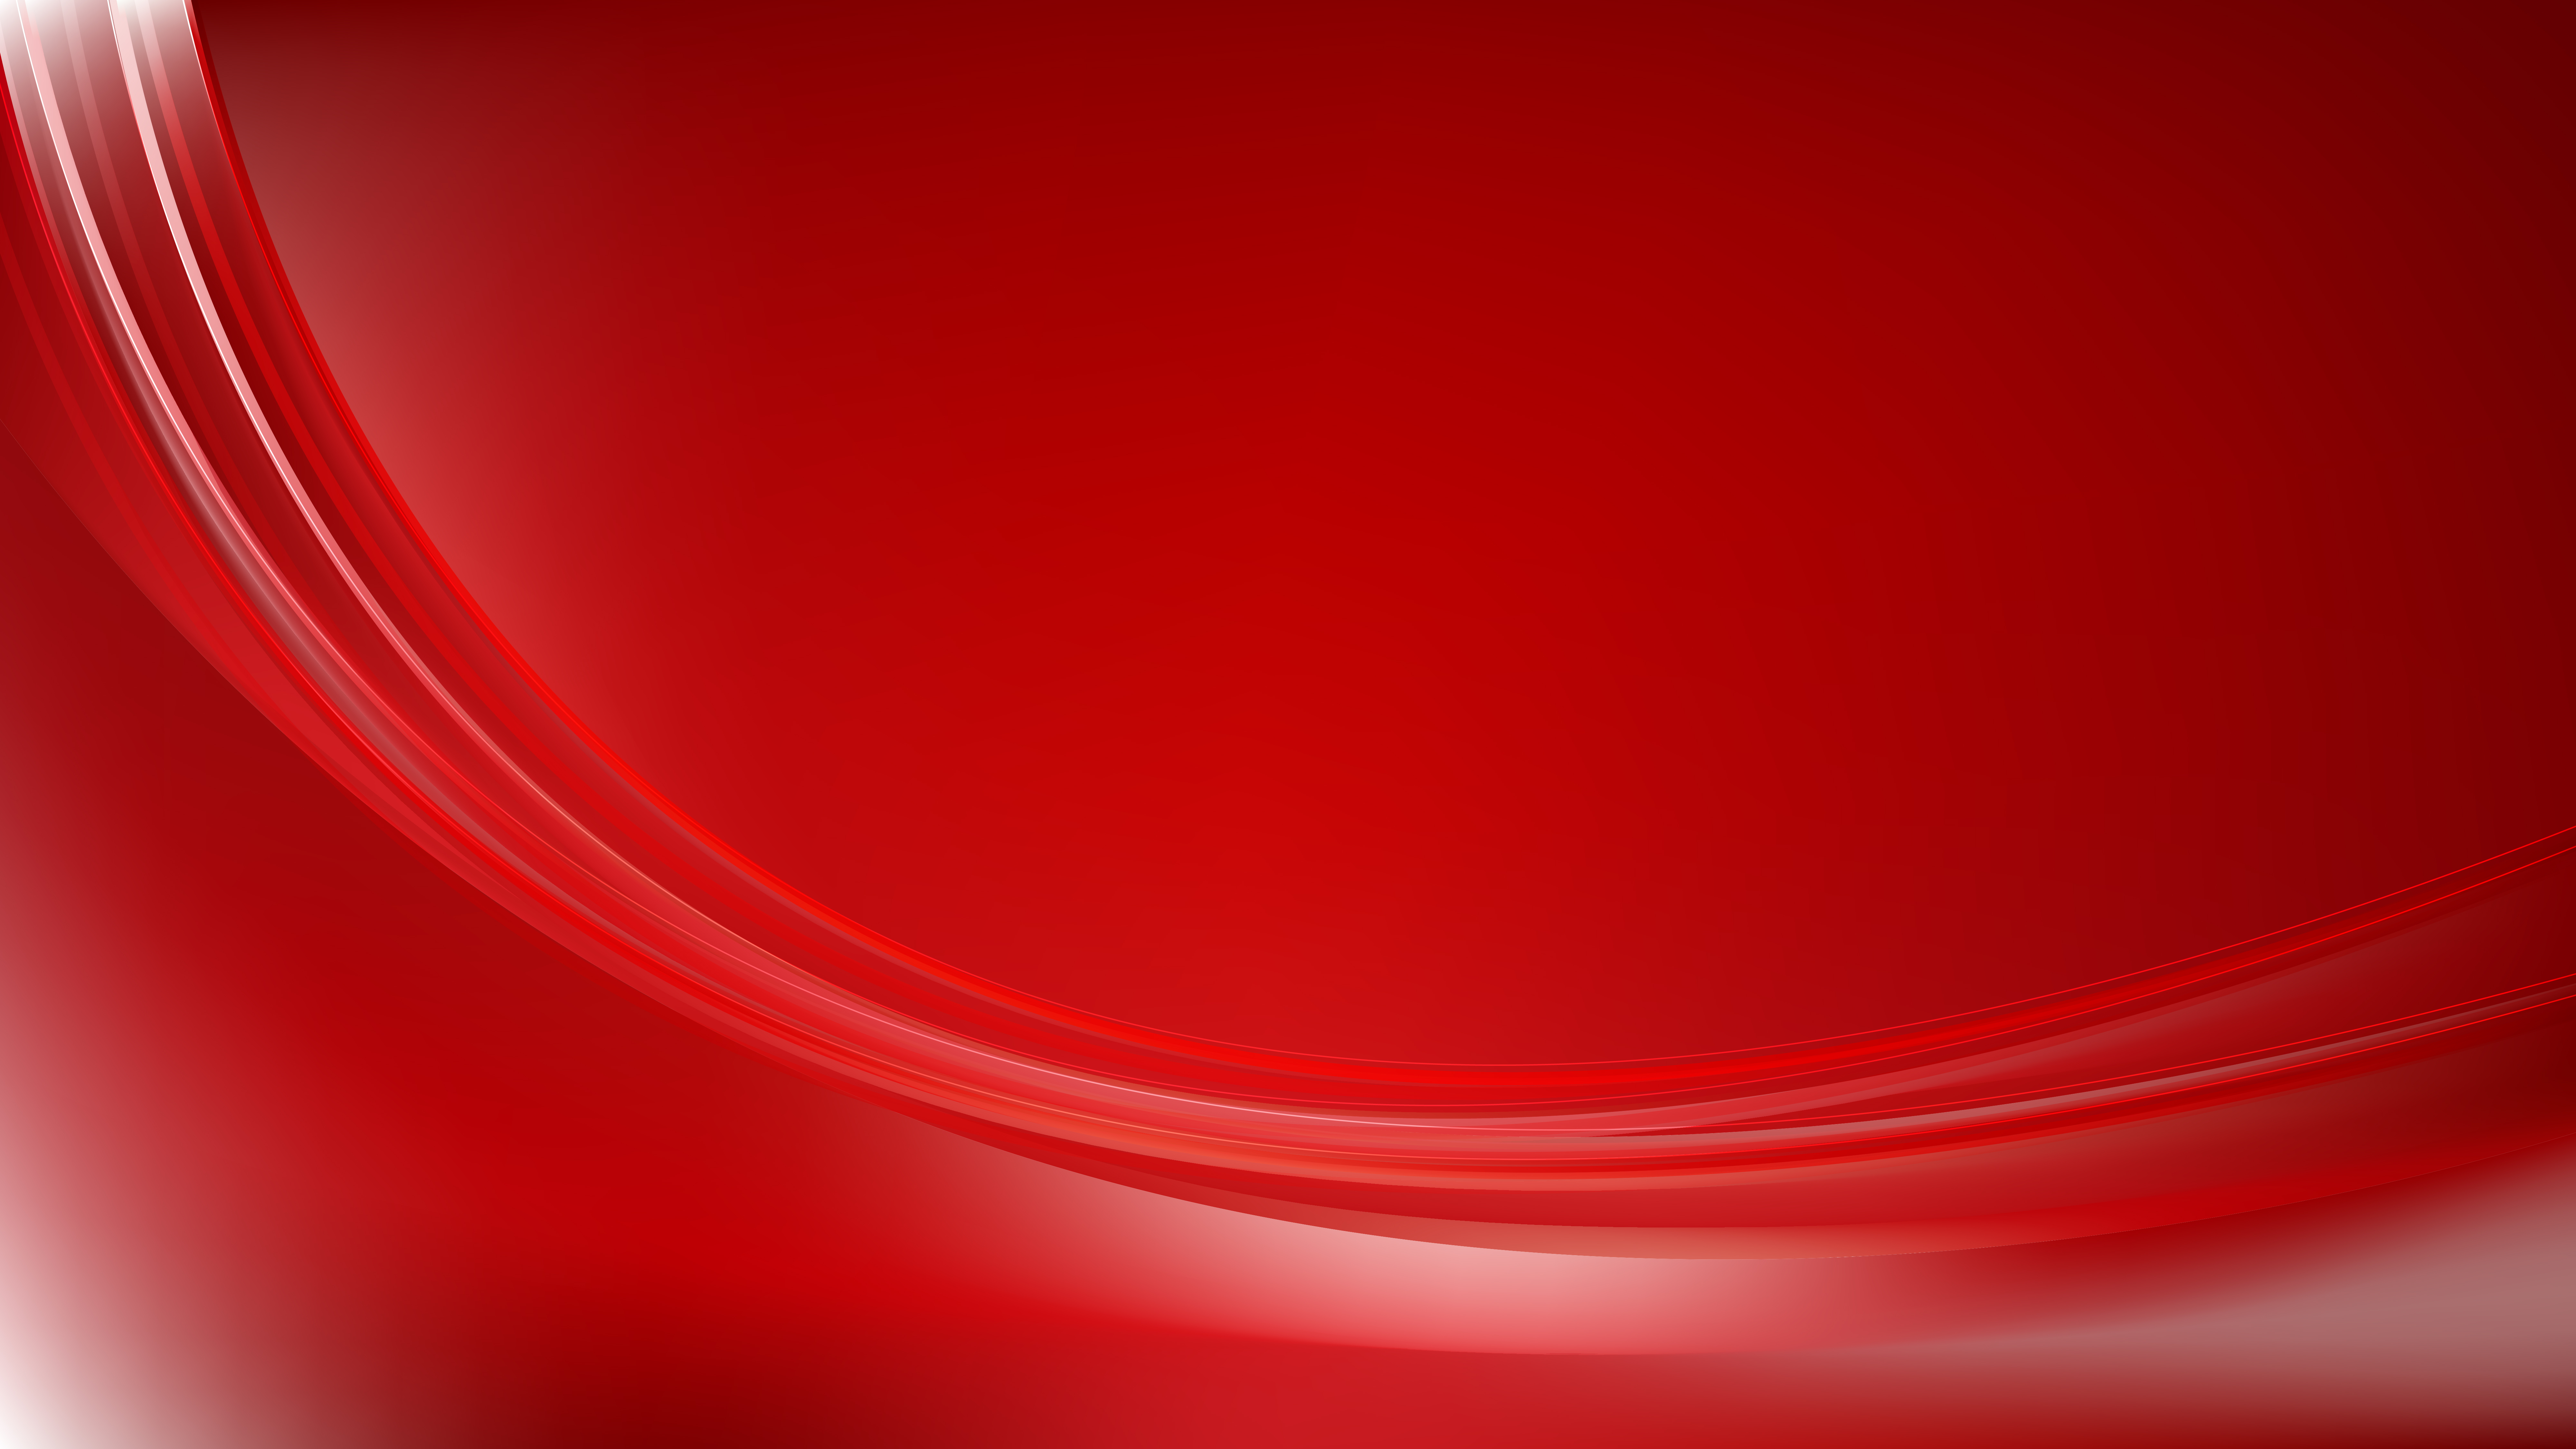 Free Abstract Red Curve Background Illustration